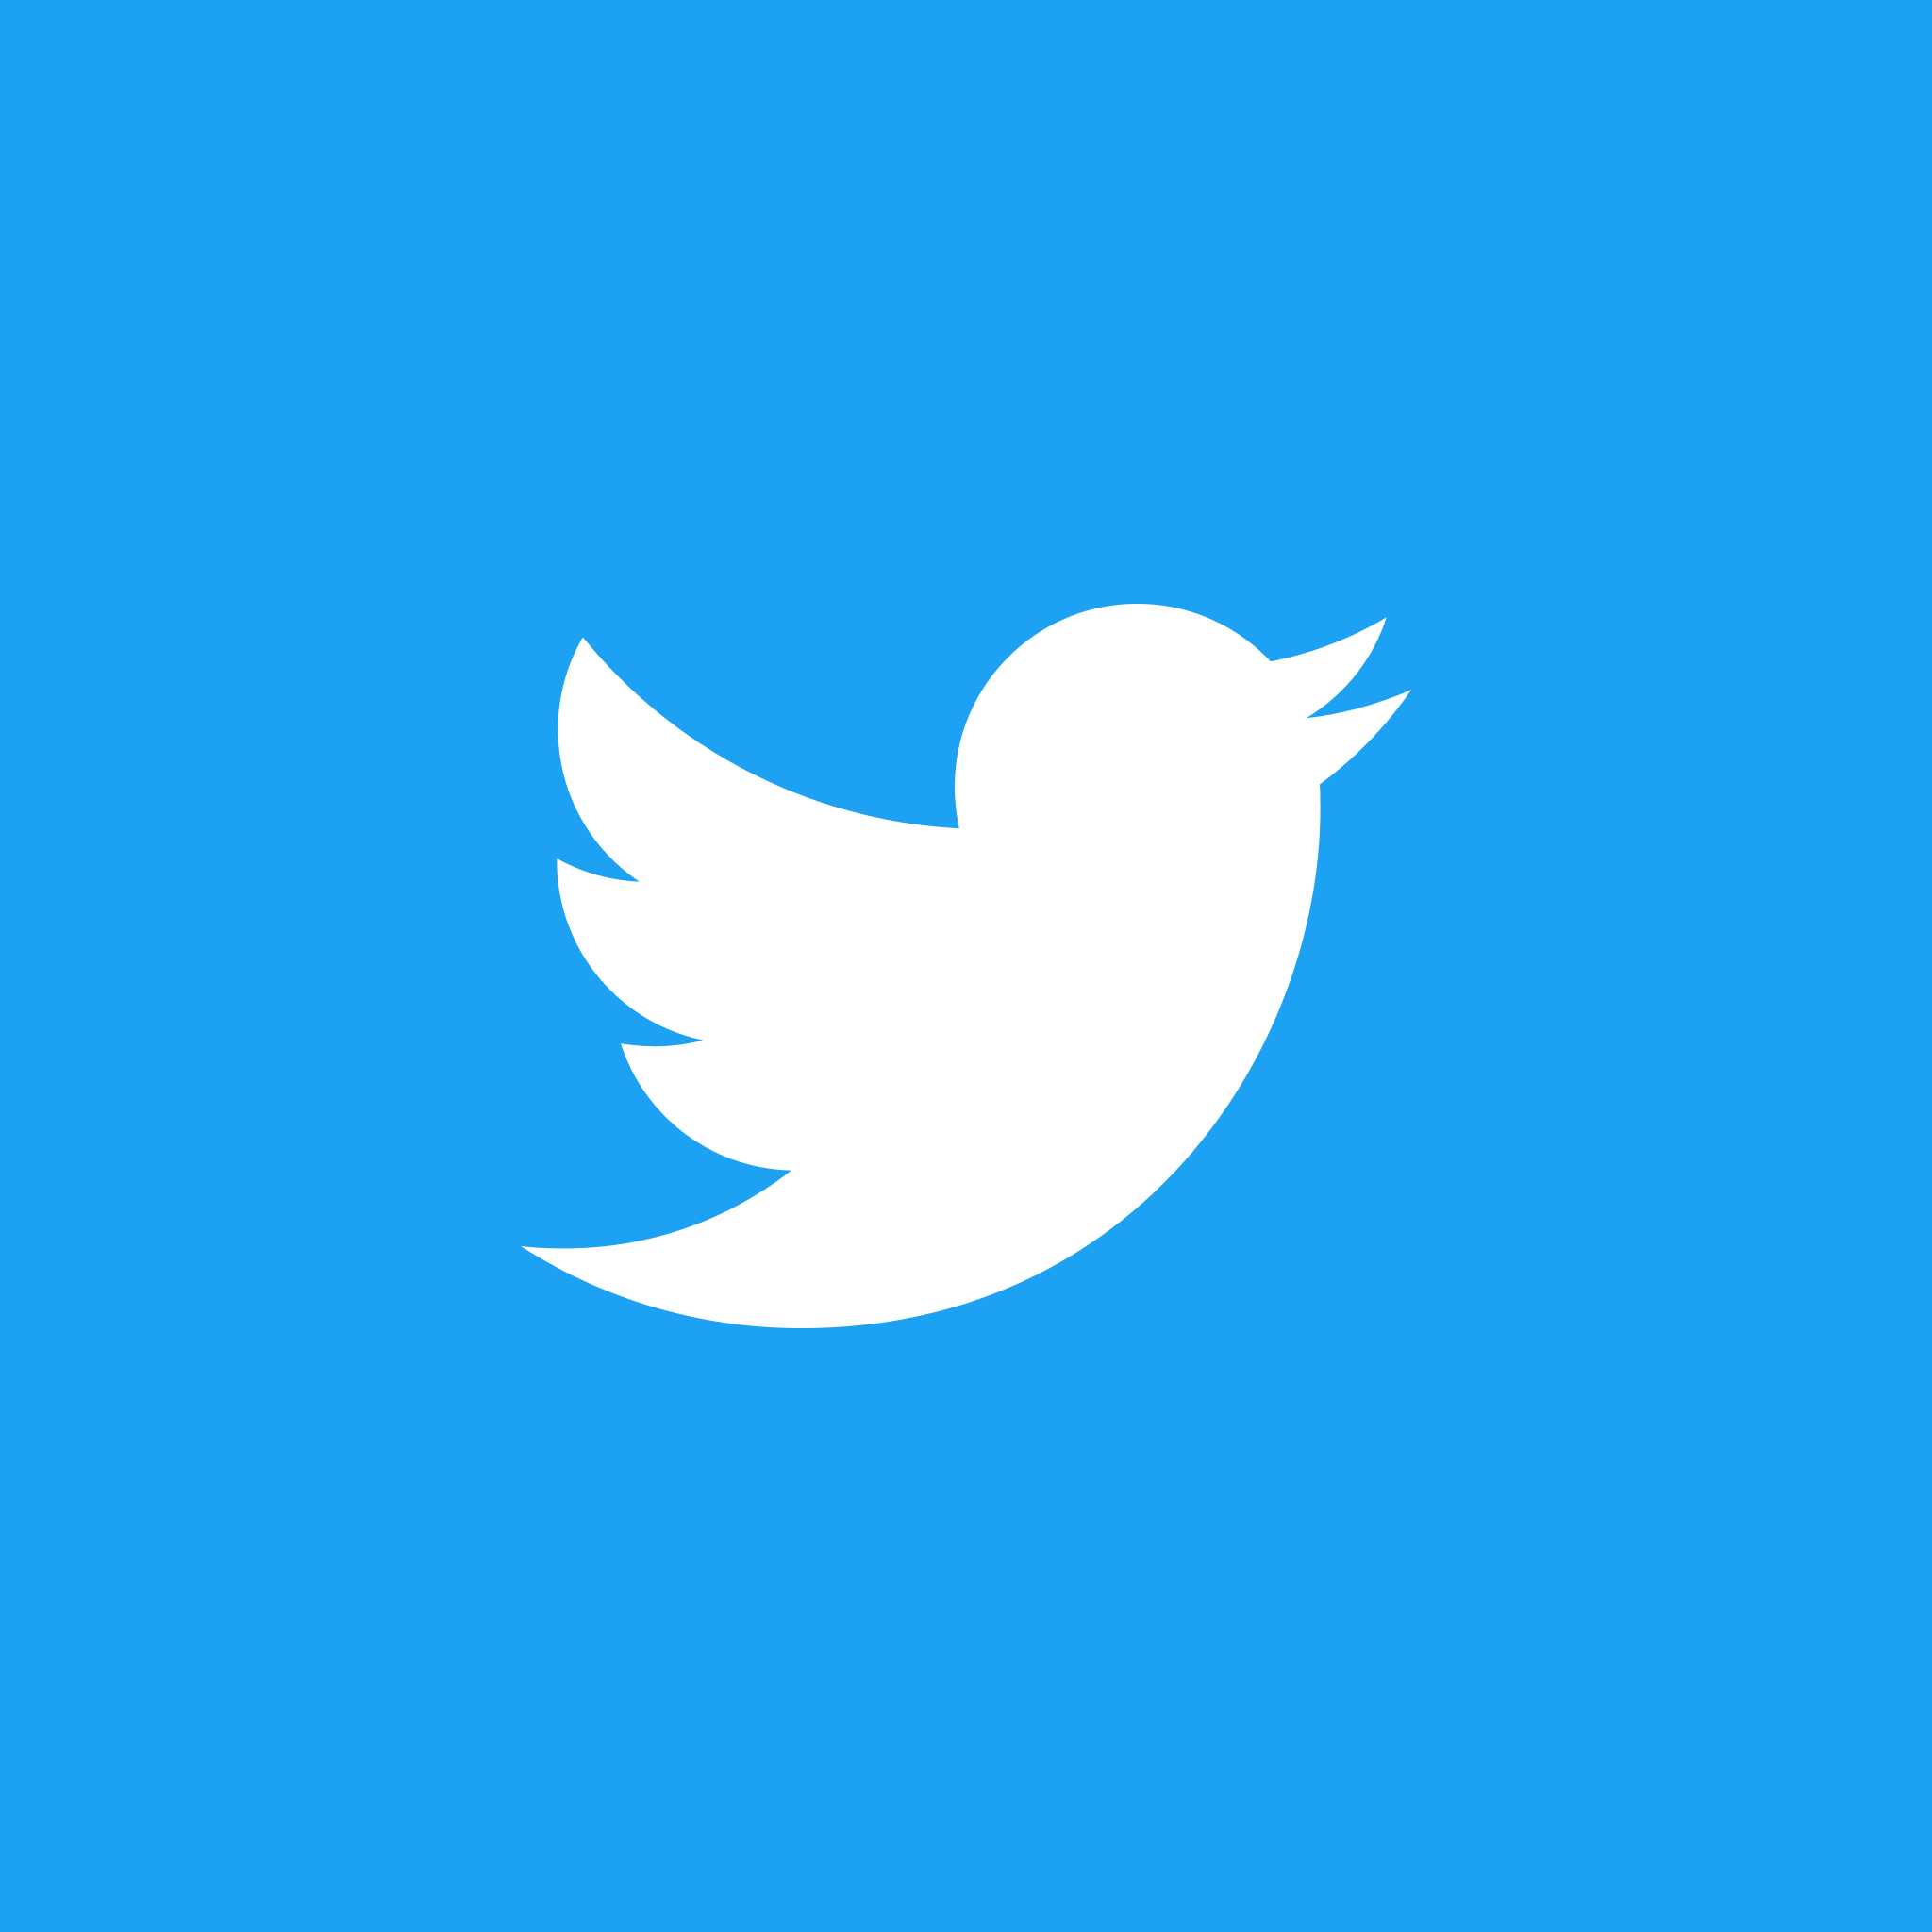 #1 image of How to Change Twitter Icon from 'X' Mark to Blue Bird